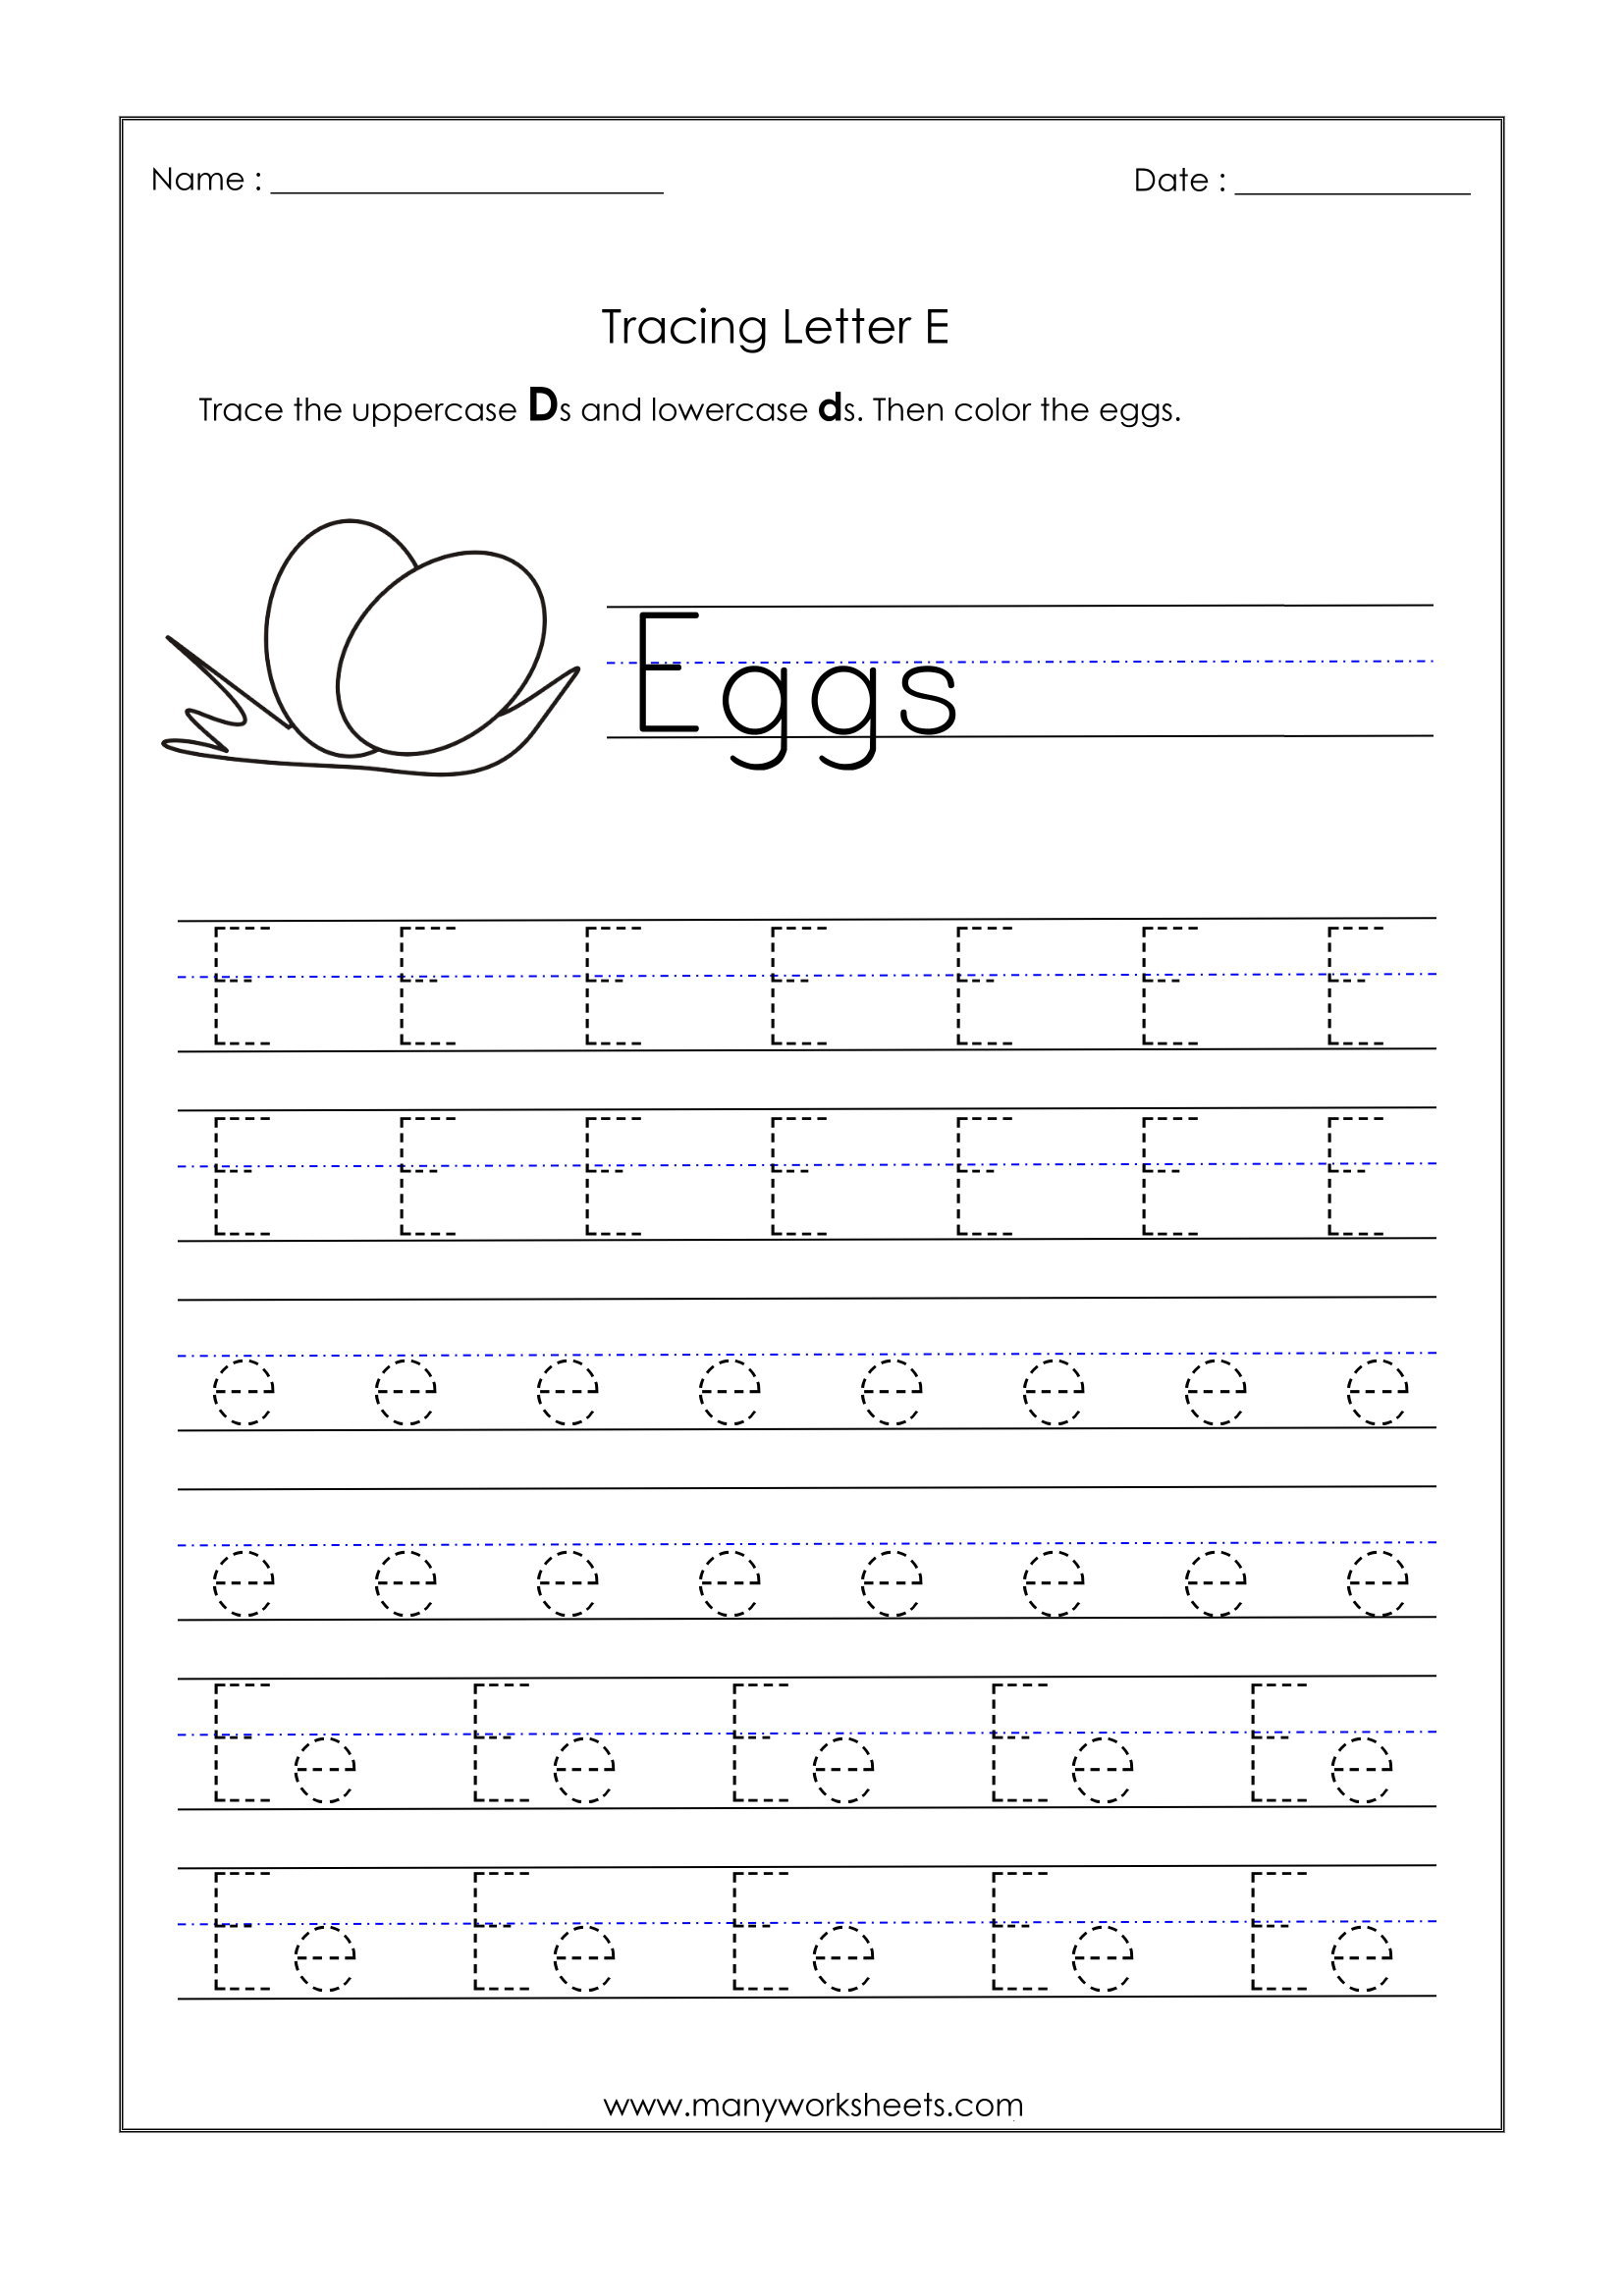 printable-letter-e-tracing-worksheets-for-preschool-alphabet-free-letter-e-tracing-worksheets